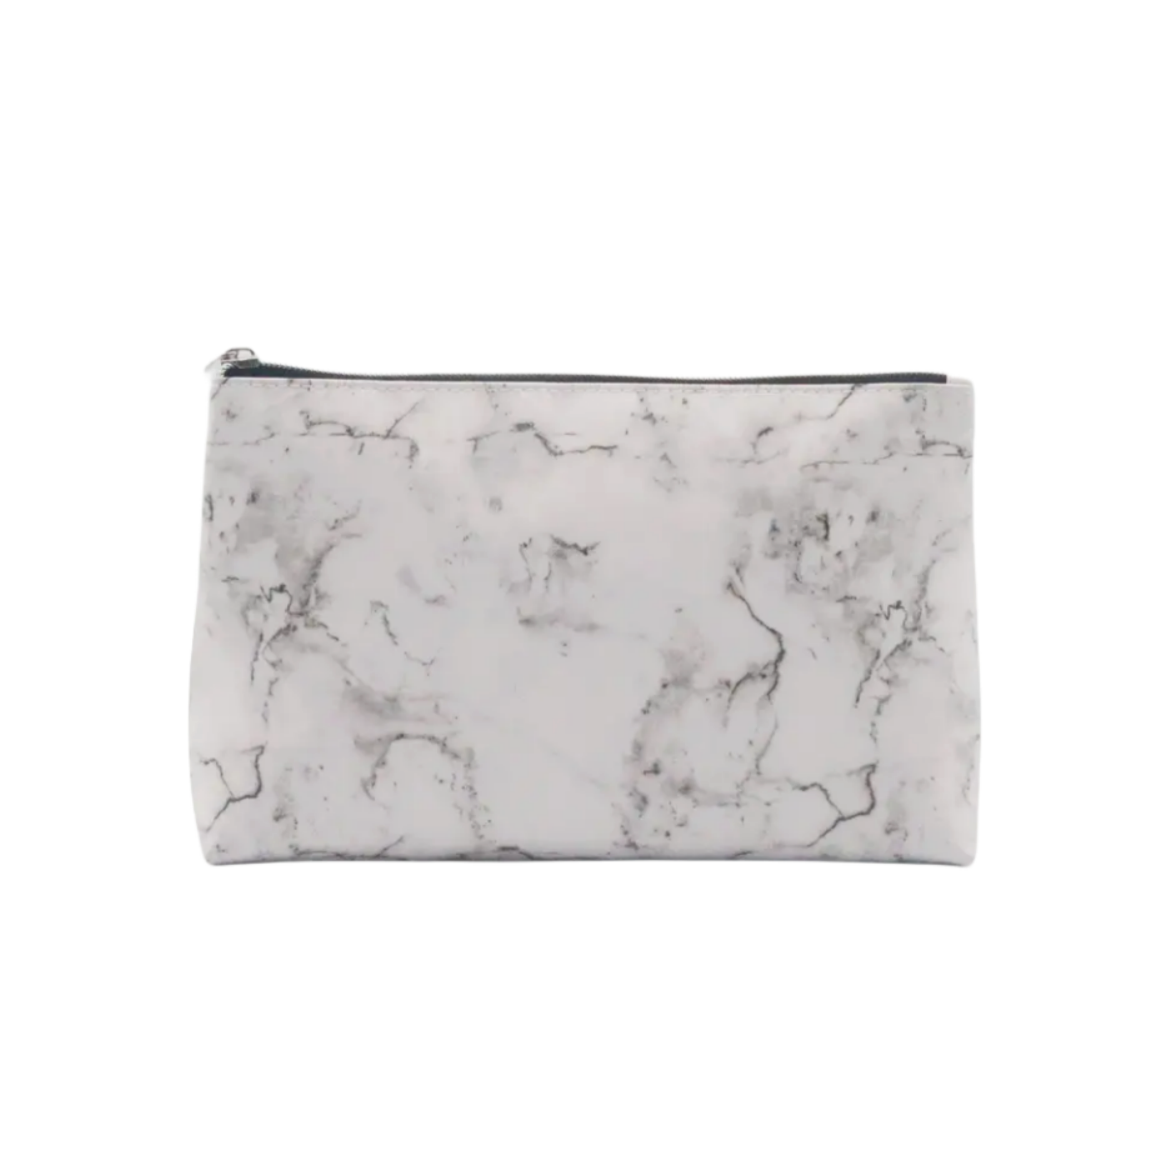 New Durable Tyvek Paper Beauty Bag Marble Pattern Recyclable White Dupont Tyvek Paper Cosmetic Makeup Bags